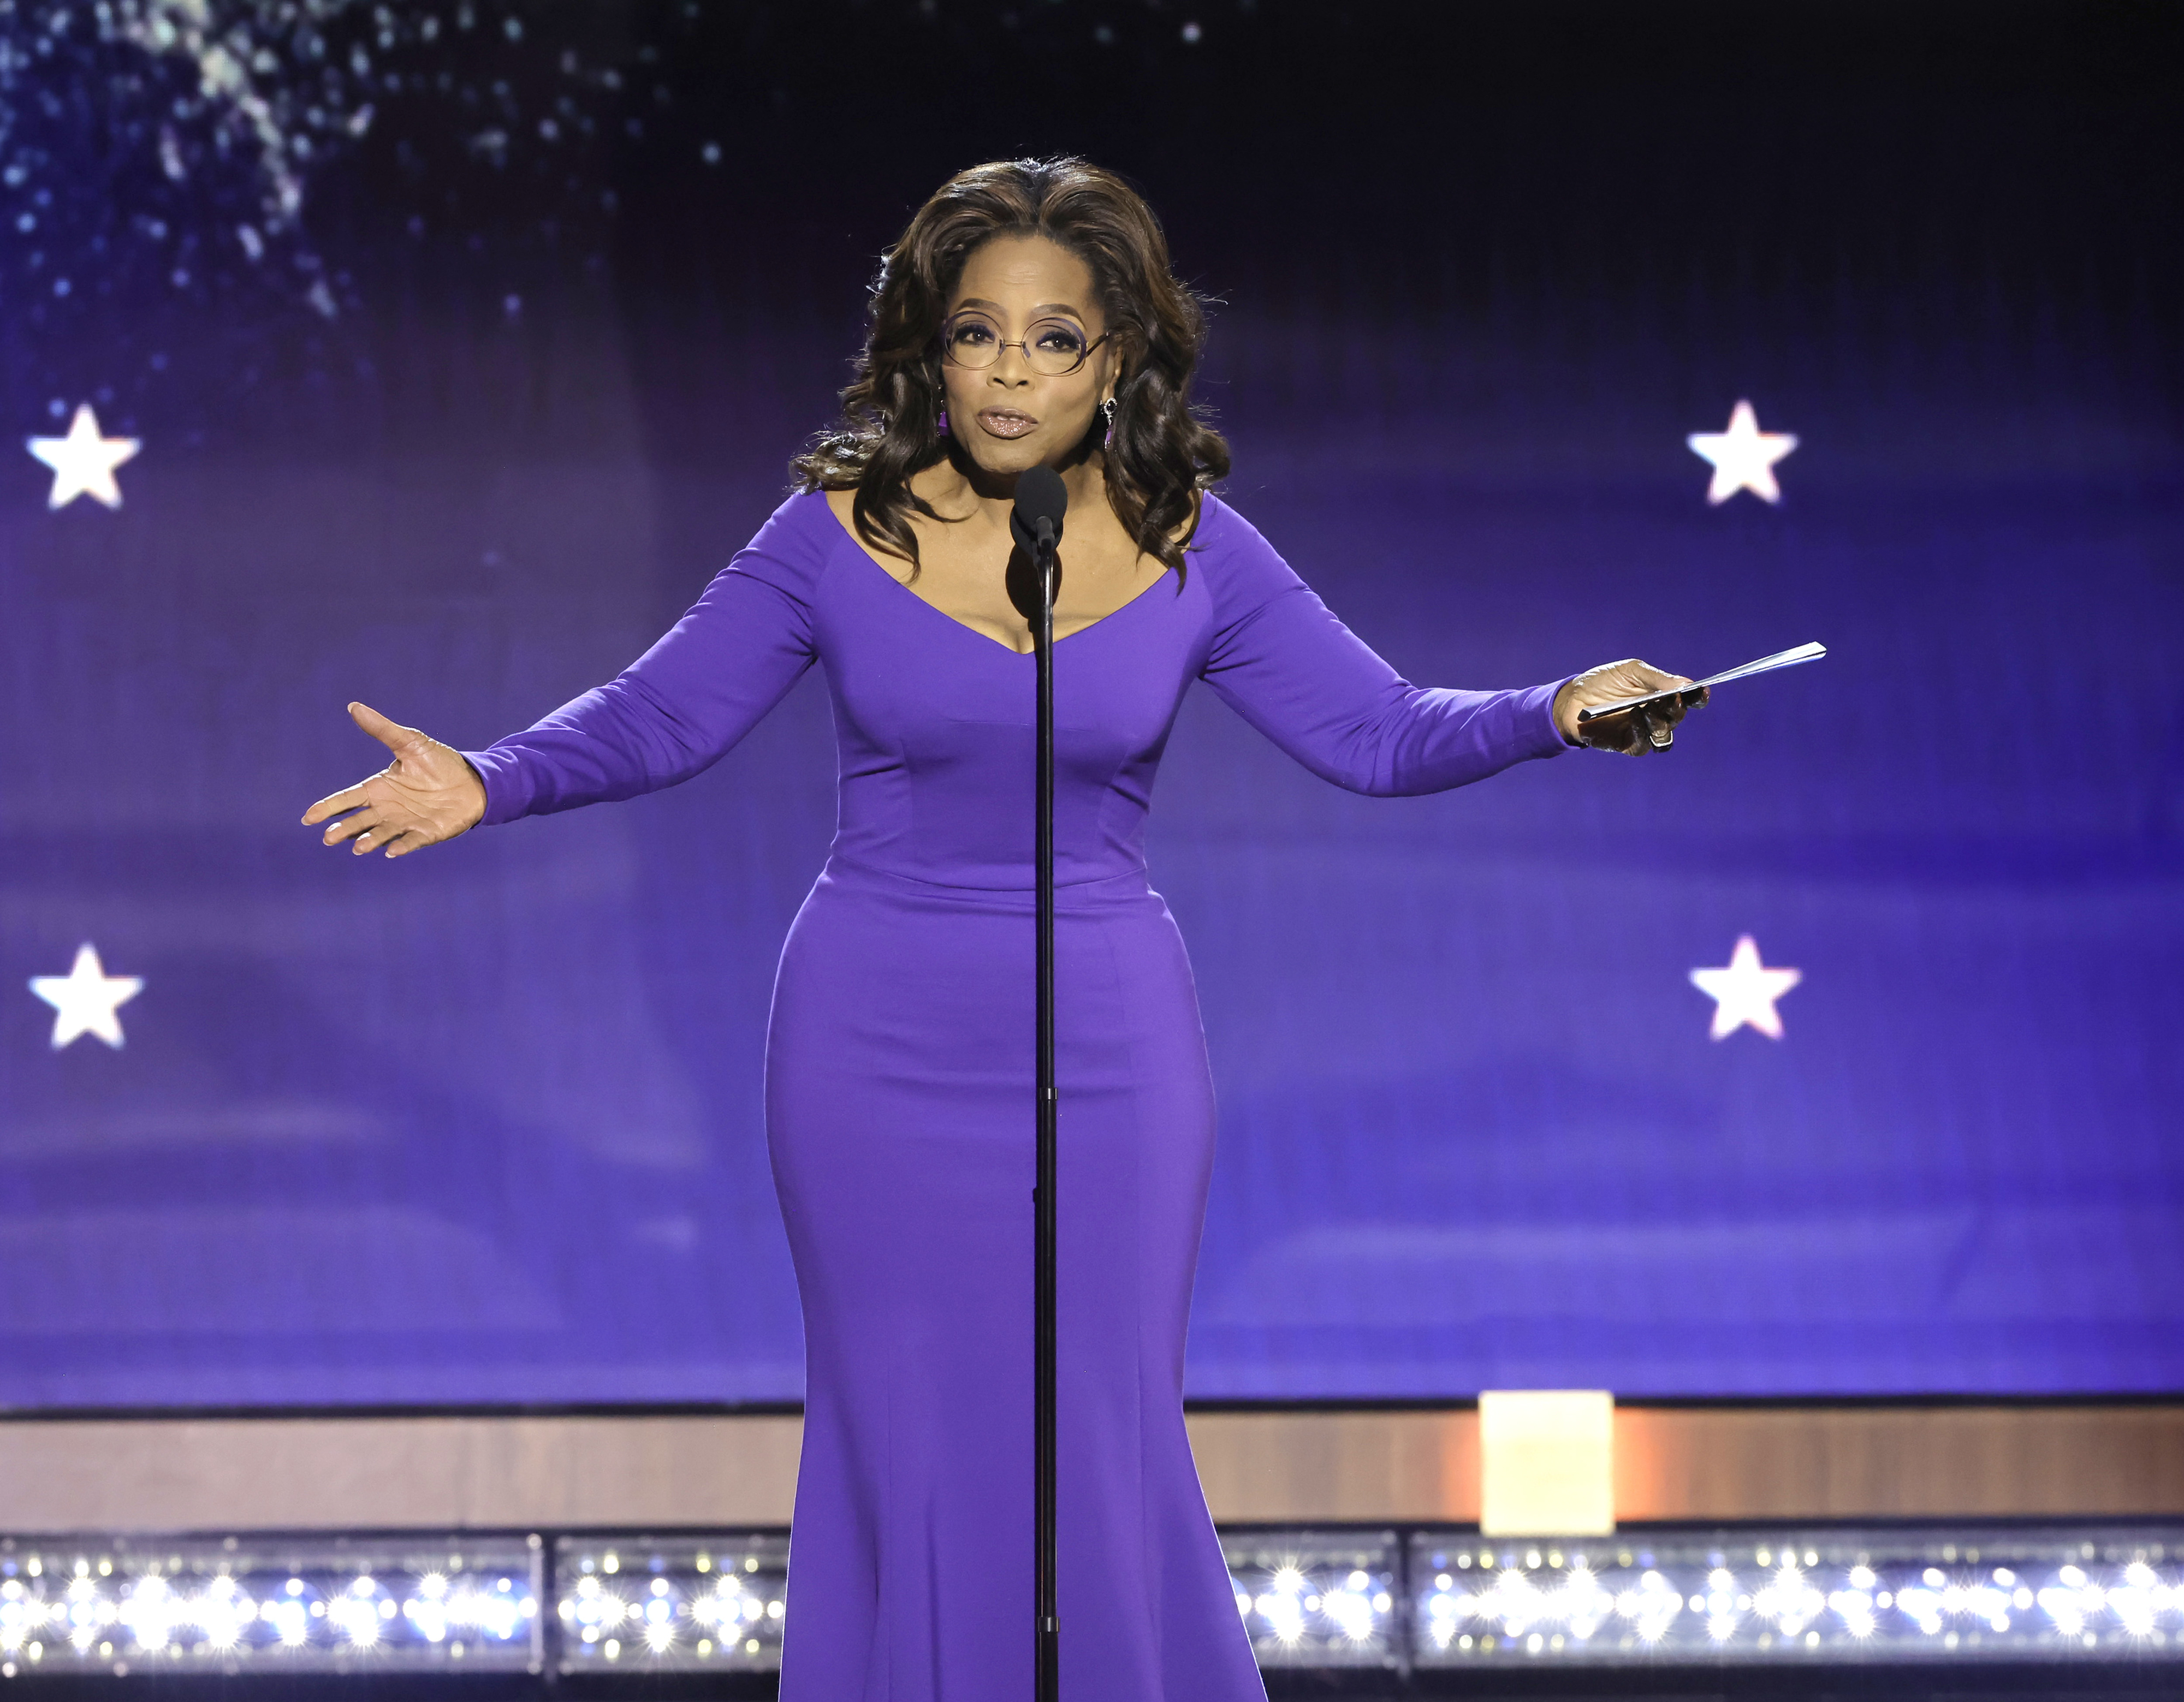 Oprah Winfrey on stage in a long-sleeved dress, gesturing while speaking into a microphone